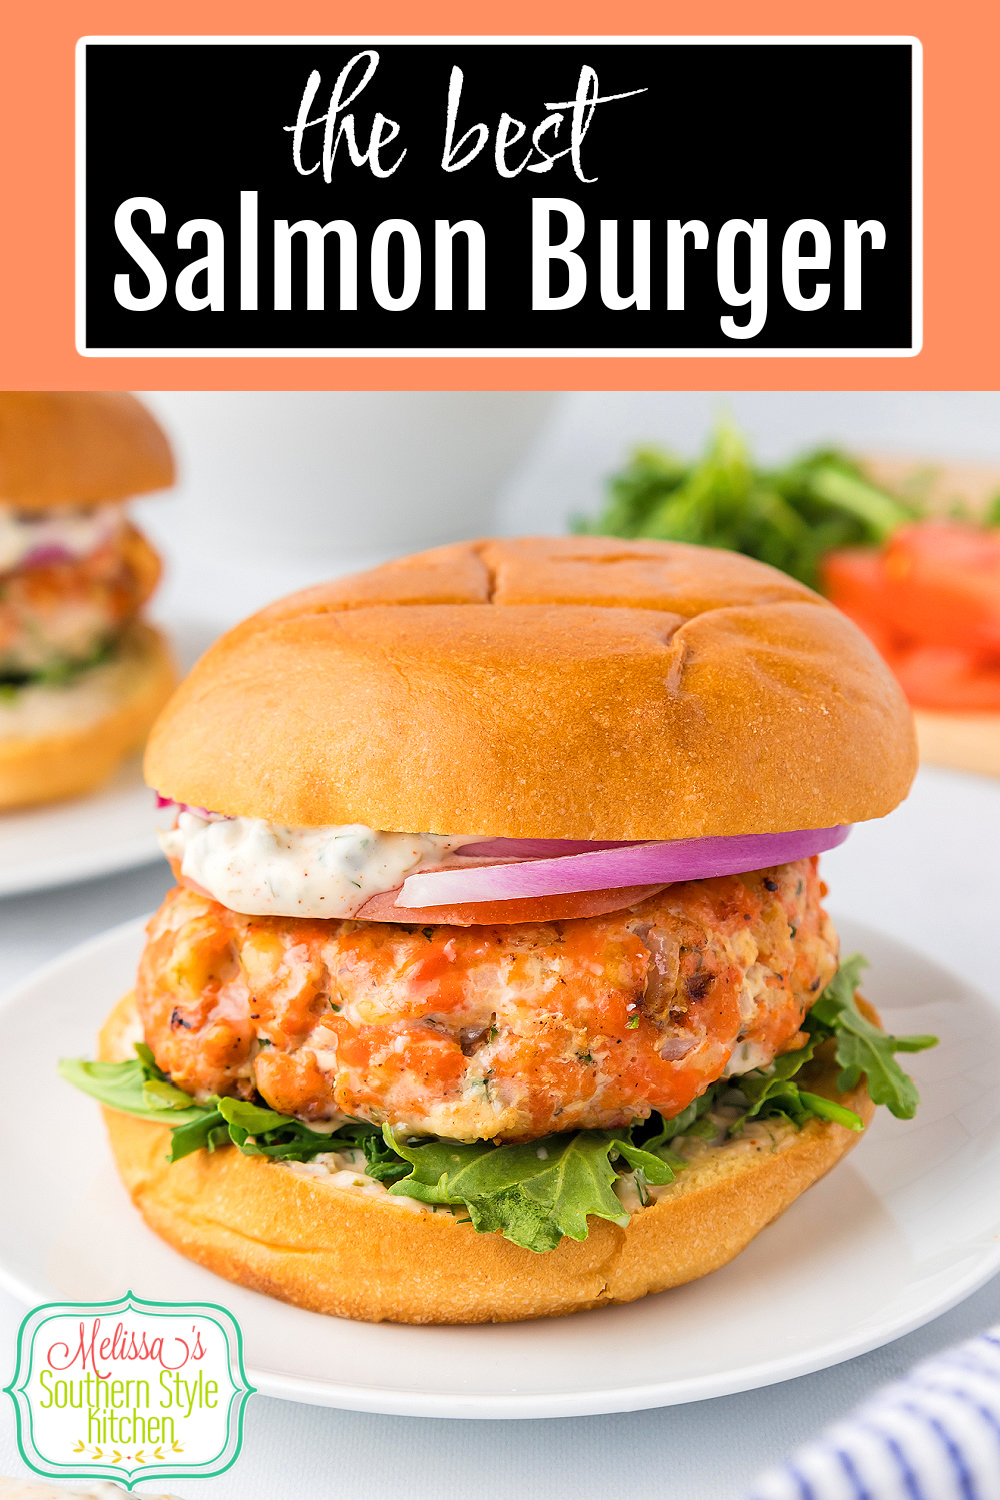 Upgrade your burger menu with this Salmon Burger recipe served on toasted buns with fresh toppings and drizzled with a remoulade sauce. #salmonrecipes #salmonburgers #easyburgerrecipes #grilledsalmon #freshsalmonrecipes